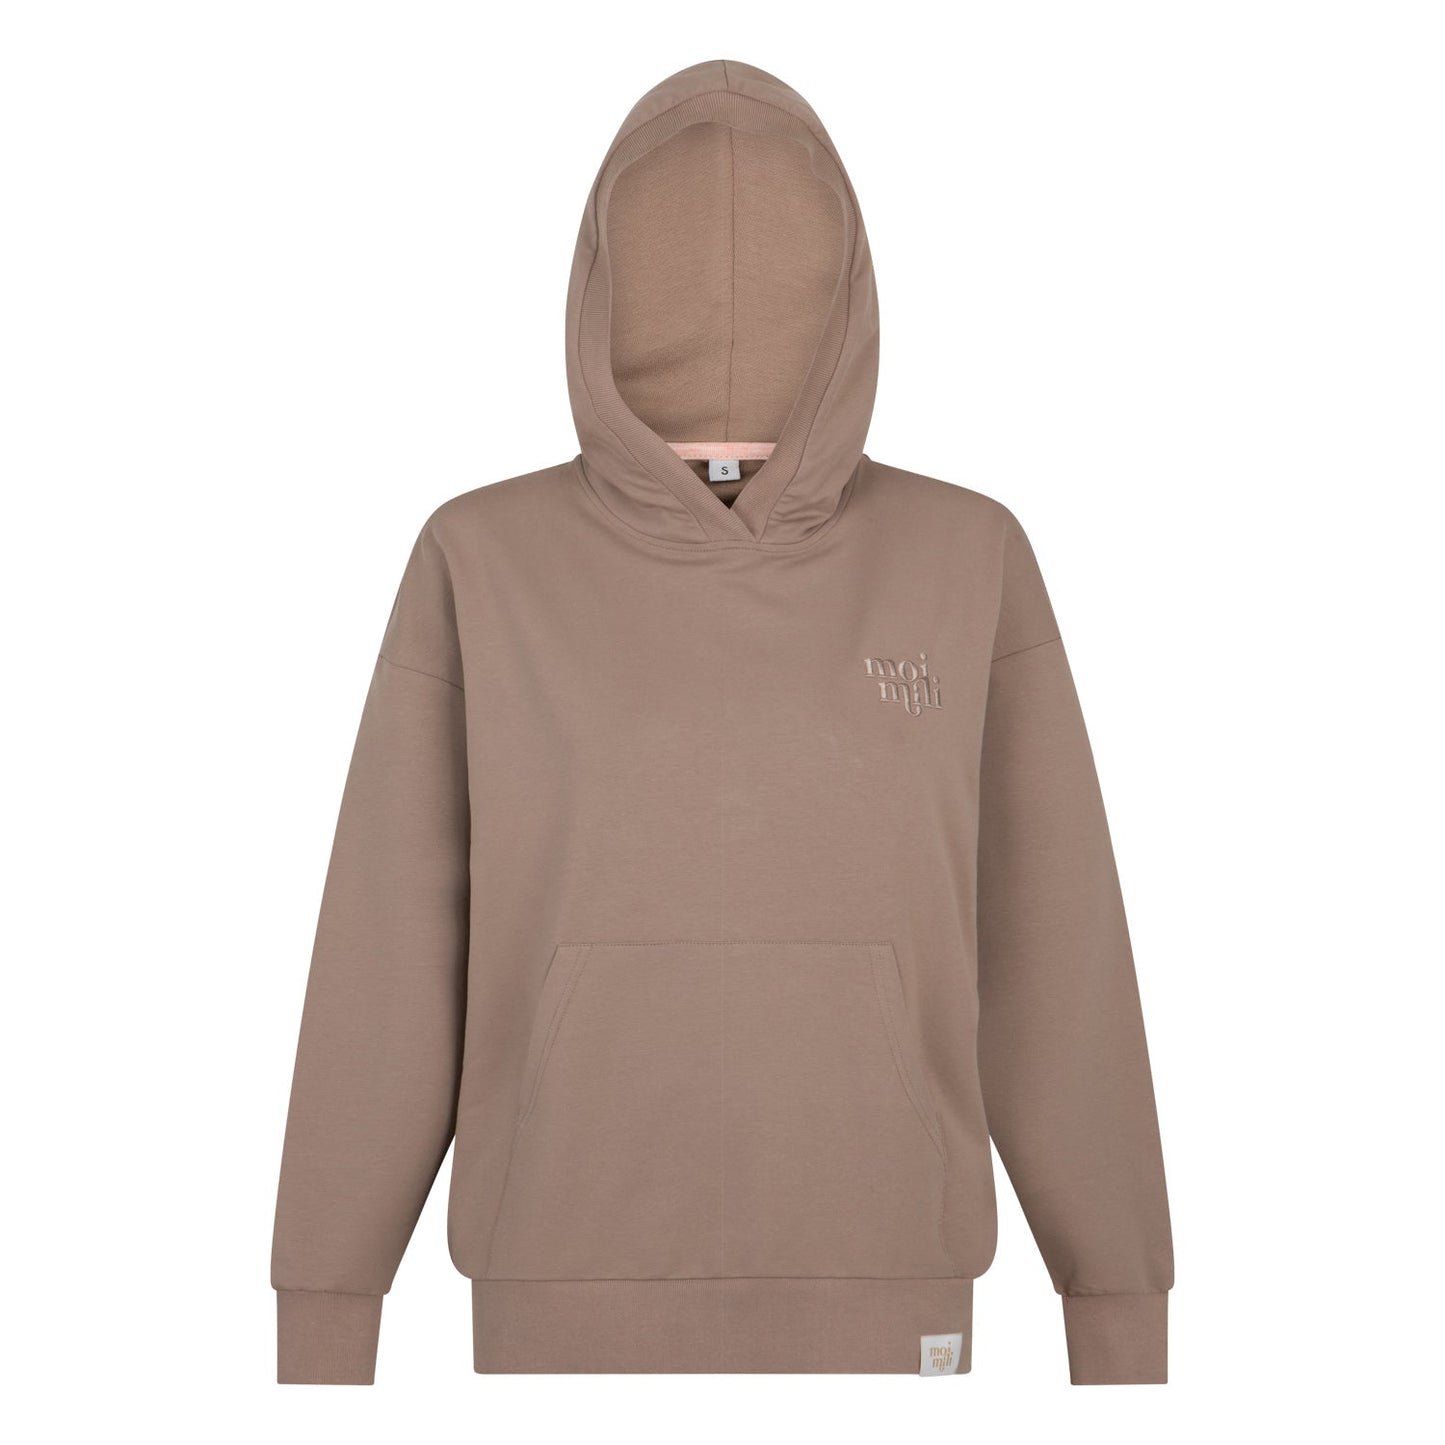 Hoodie "Taupe" by Moi Mili